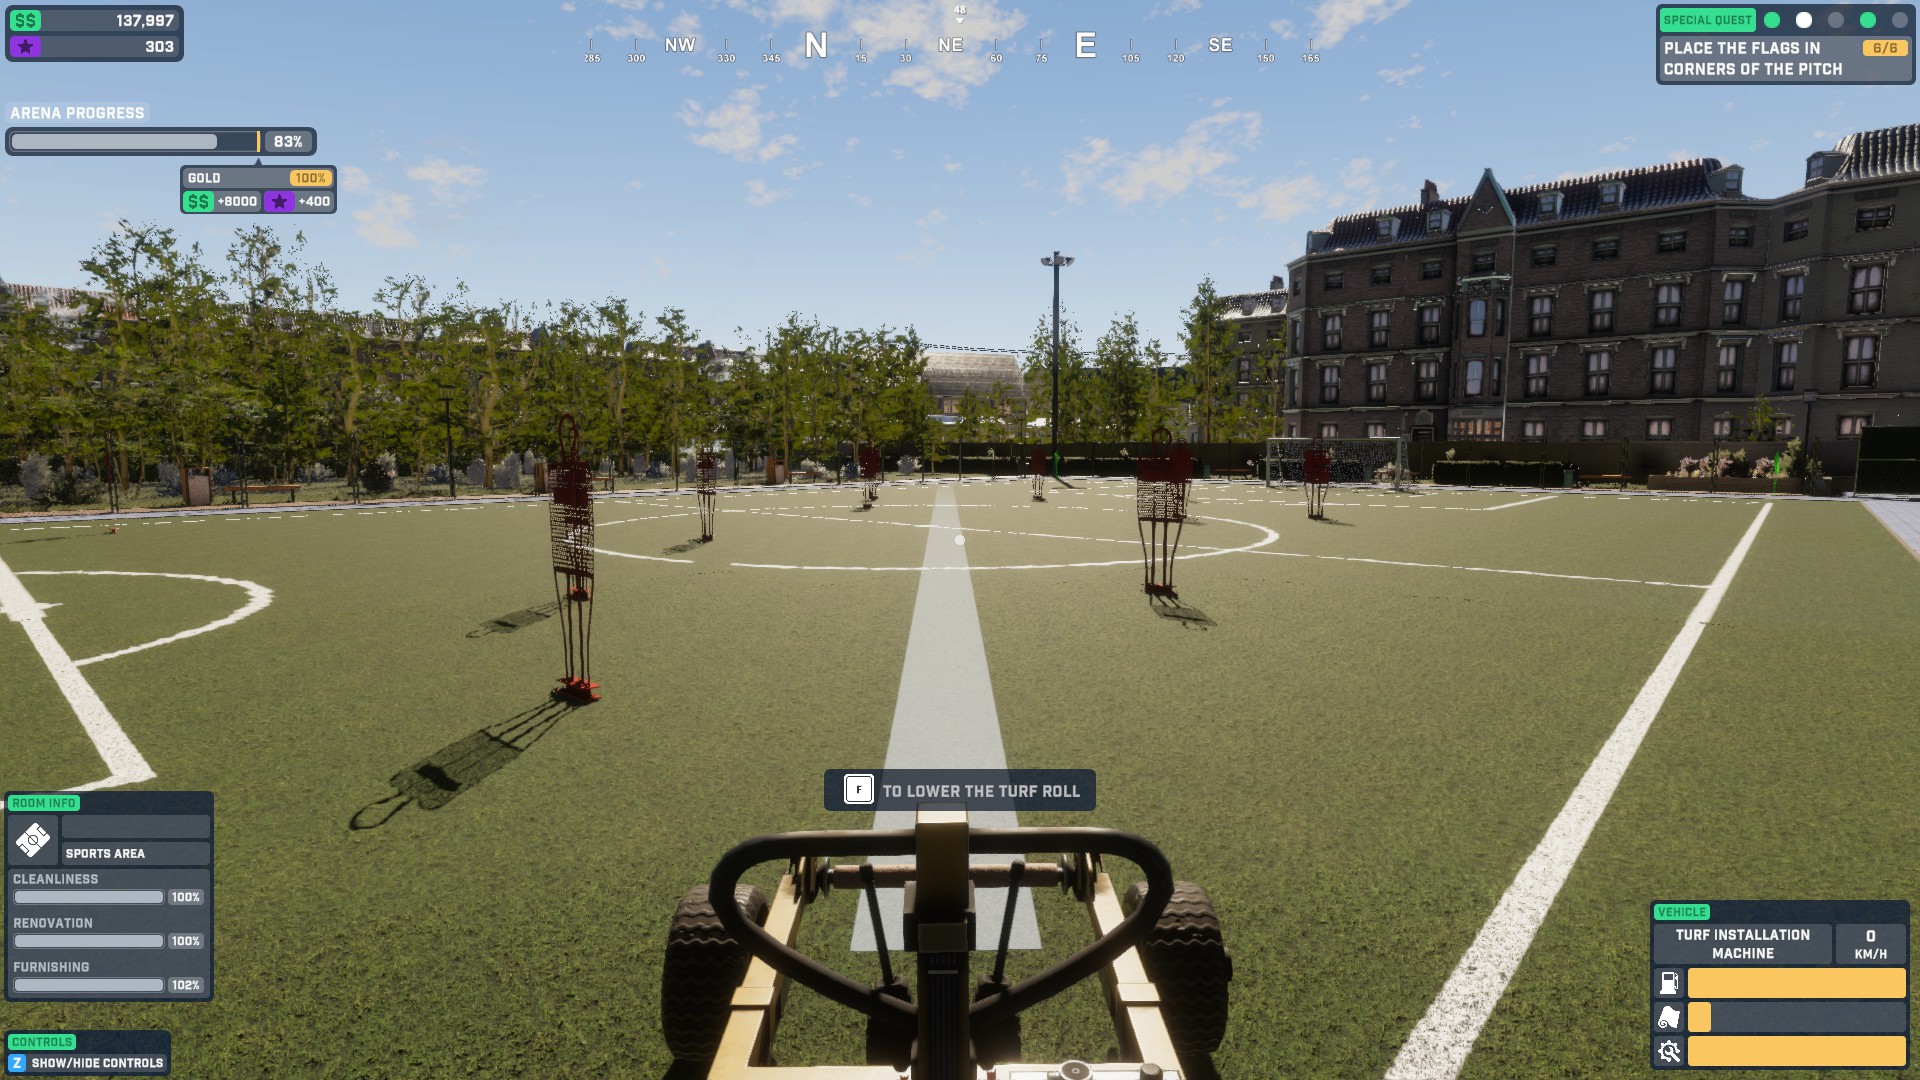 A football pitch with several training dummies scattered around. The [layer is pushing a Turf machine to repair any damage on the field. Large building to the right is overlooking the field.